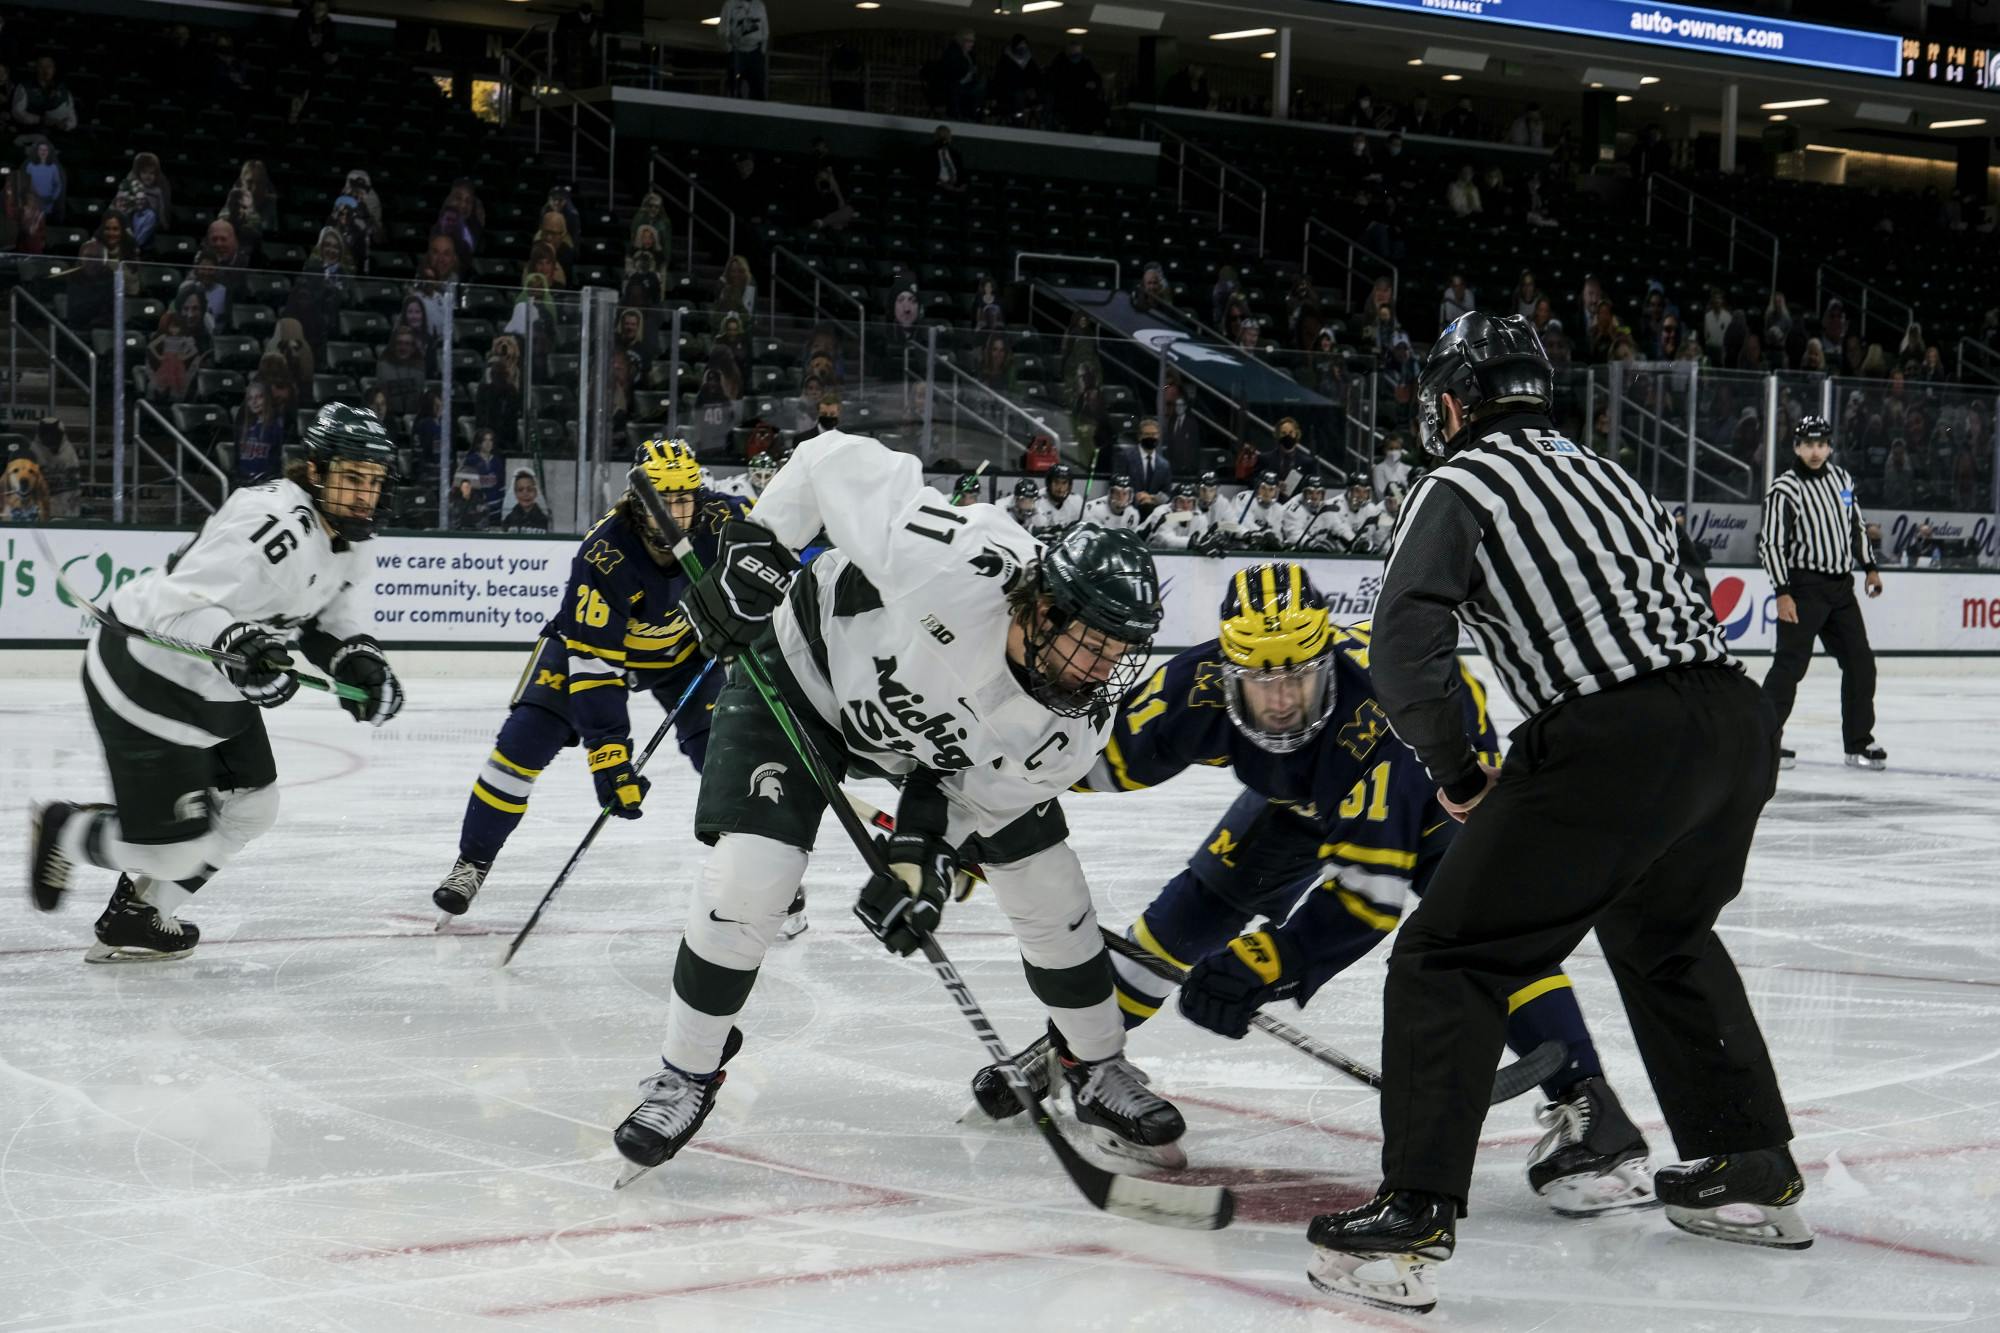 <p>Senior forward Tommy Apap (11) faces off against Michigan on Jan. 9, 2021, at Munn Ice Arena. The Spartans defeated the Wolverines, 3-2. </p>